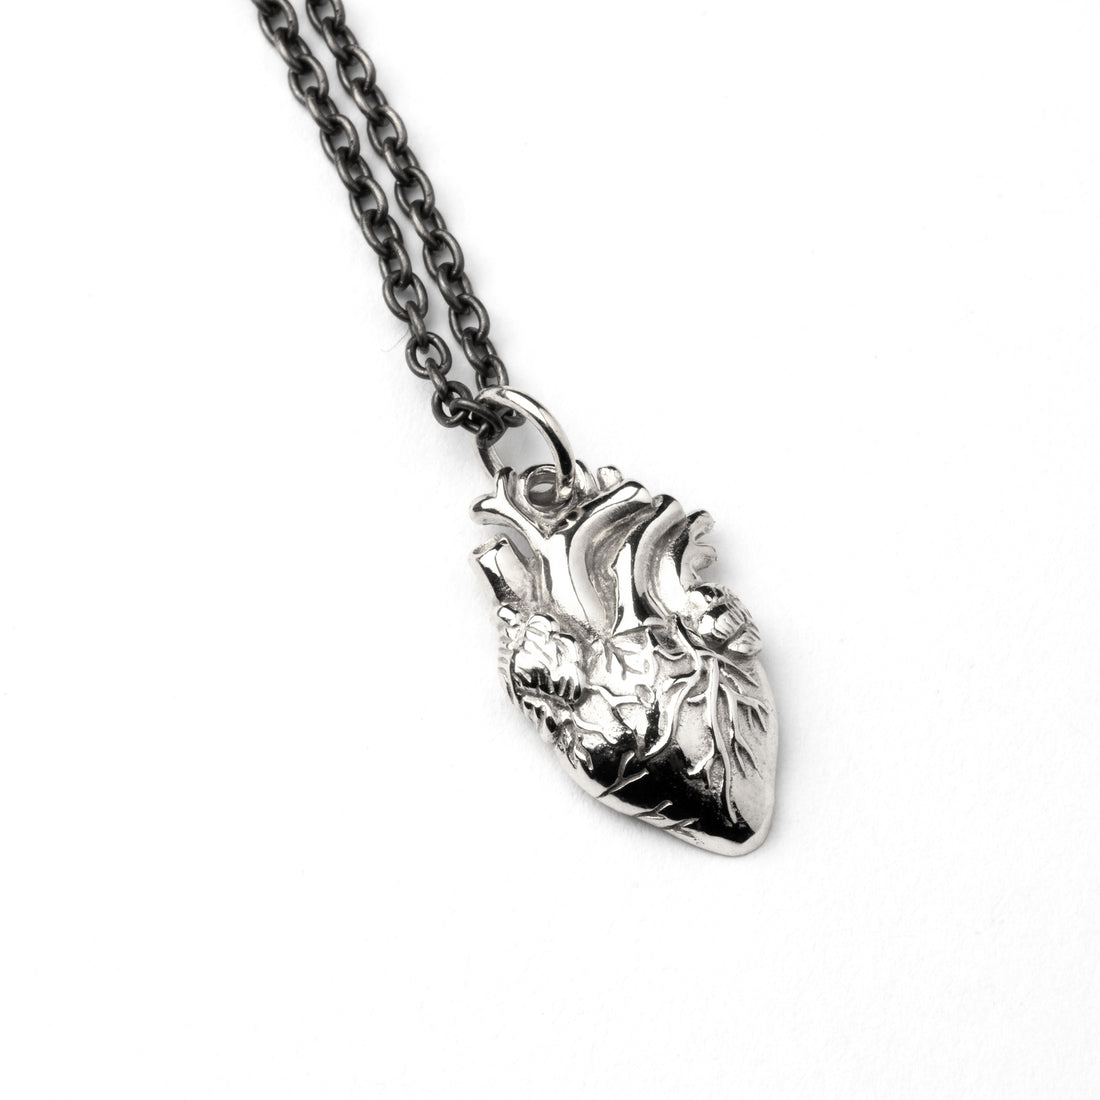 sterling silver anatomical heart charm necklace on a silver chain